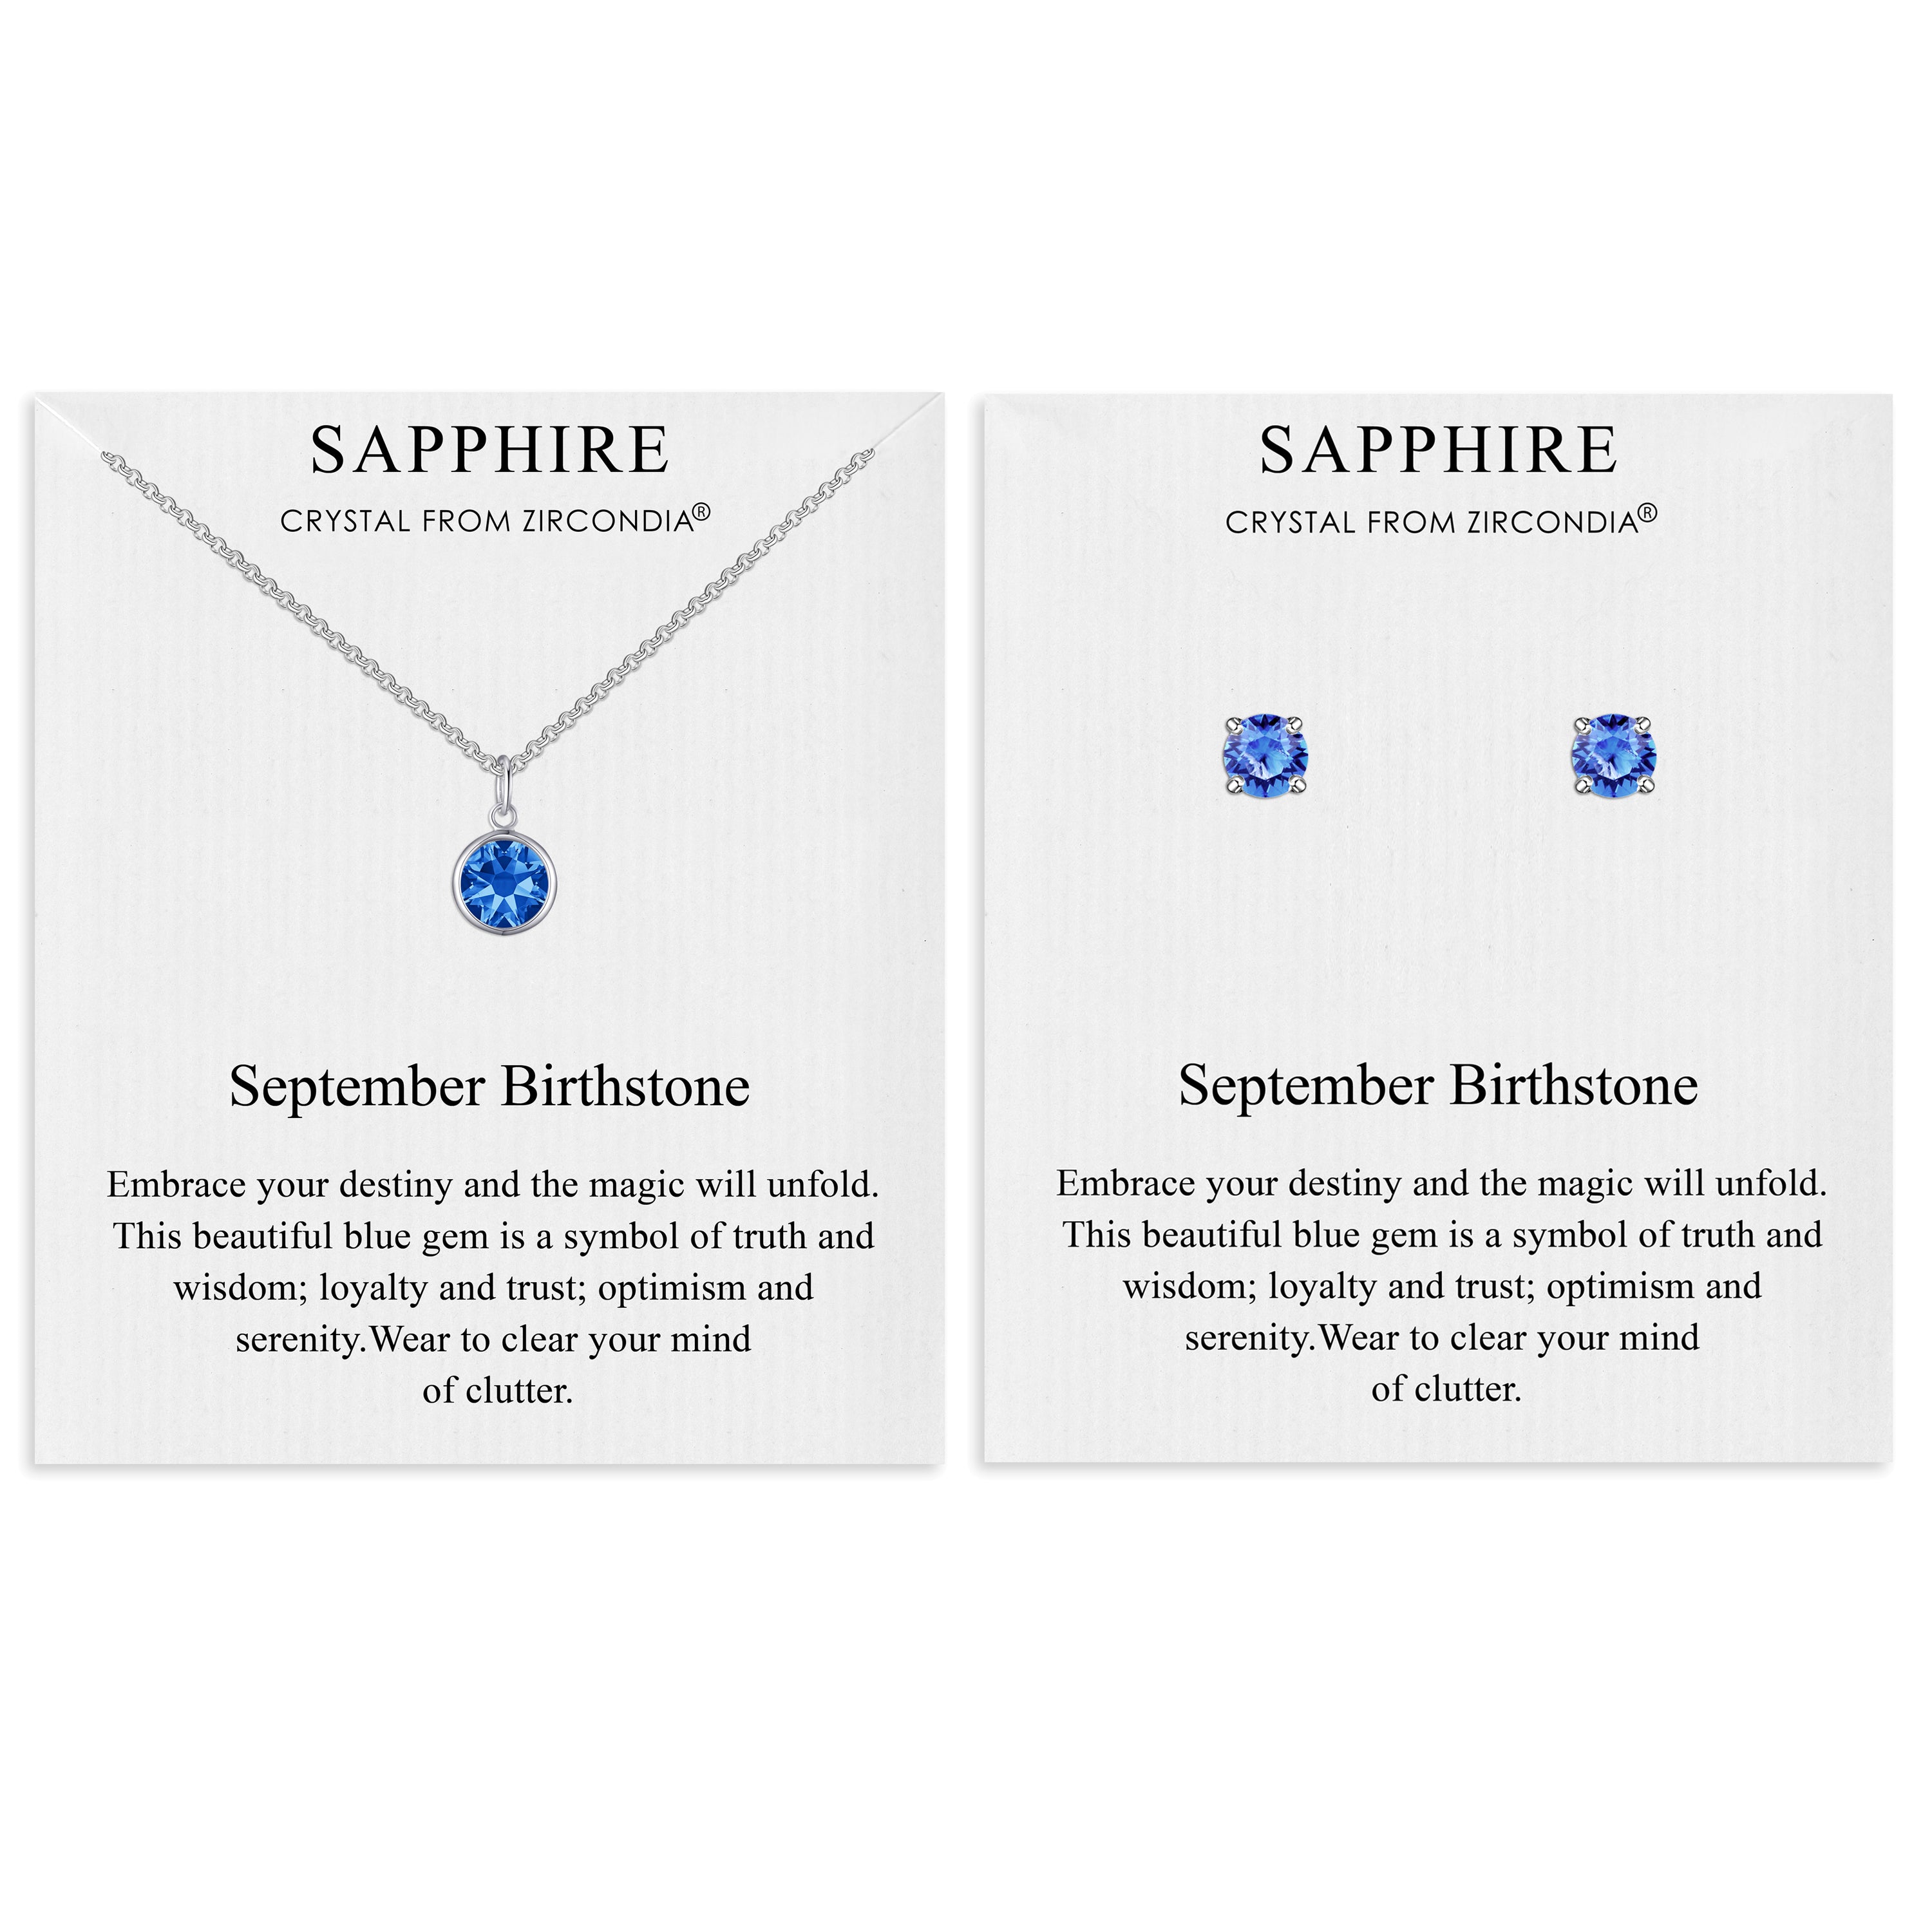 September (Sapphire) Birthstone Necklace & Earrings Set Created with Zircondia® Crystals by Philip Jones Jewellery